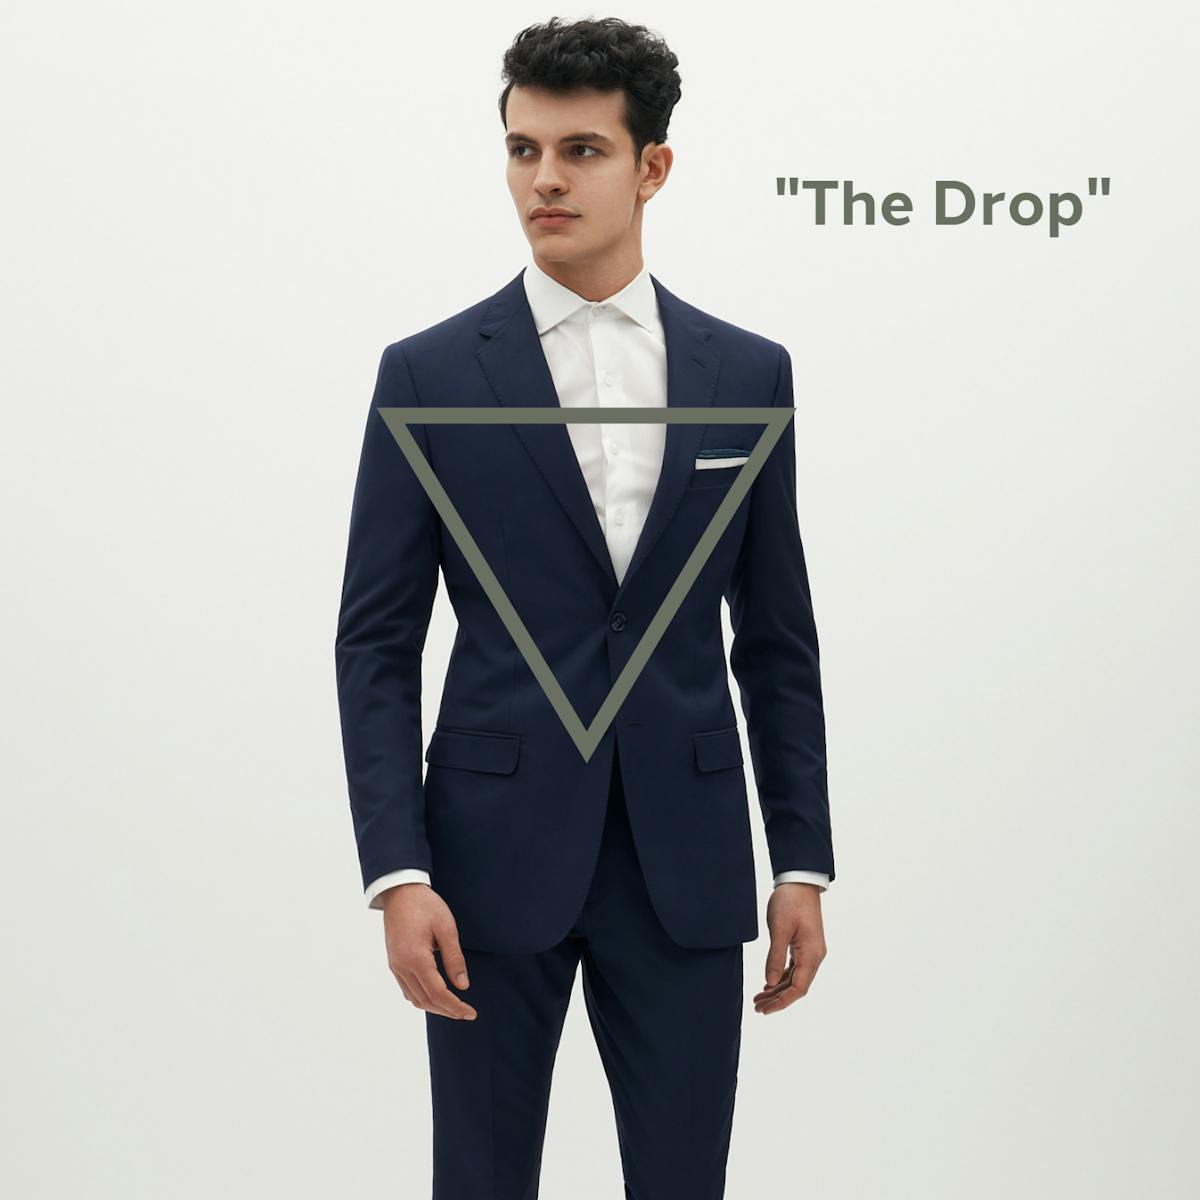 Tailored Suit Jacket, Men's Custom Fitted Suit in Navy, Fitted Navy Suit, What is "The Drop" in suiting?